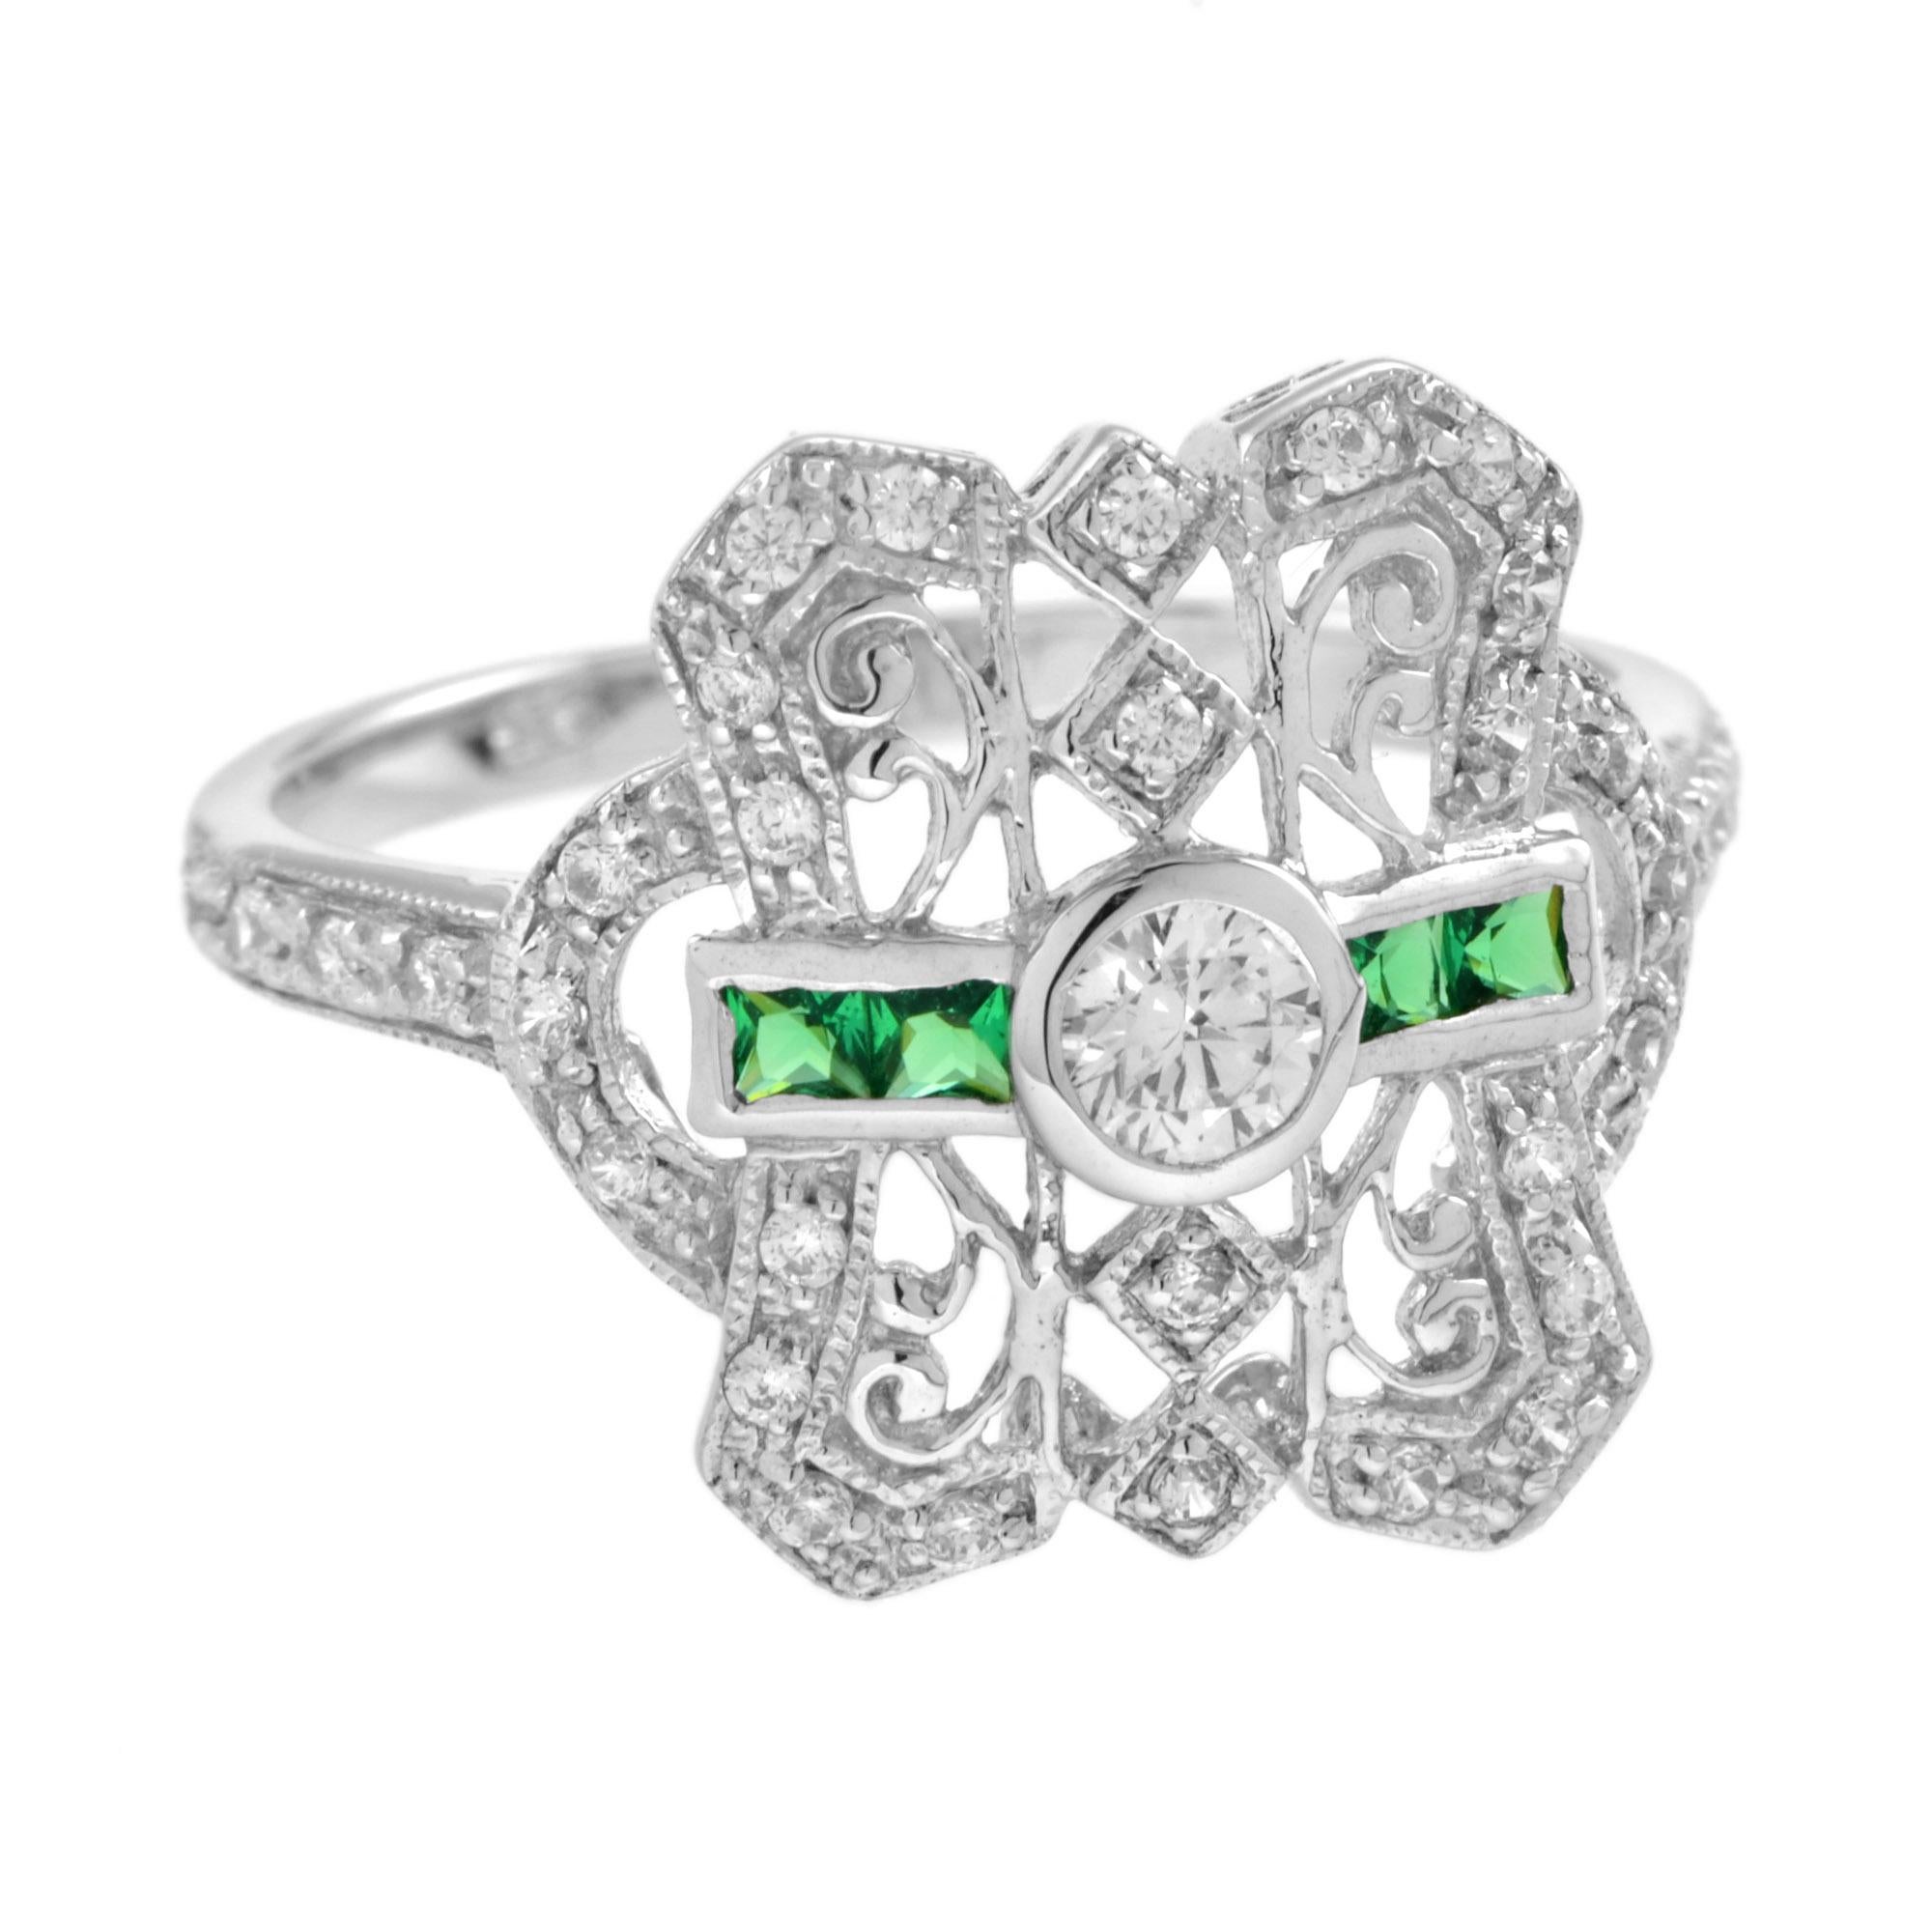 For Sale:  Diamond and Emerald Art Deco Style Filigree Ring in 14K White Gold 2